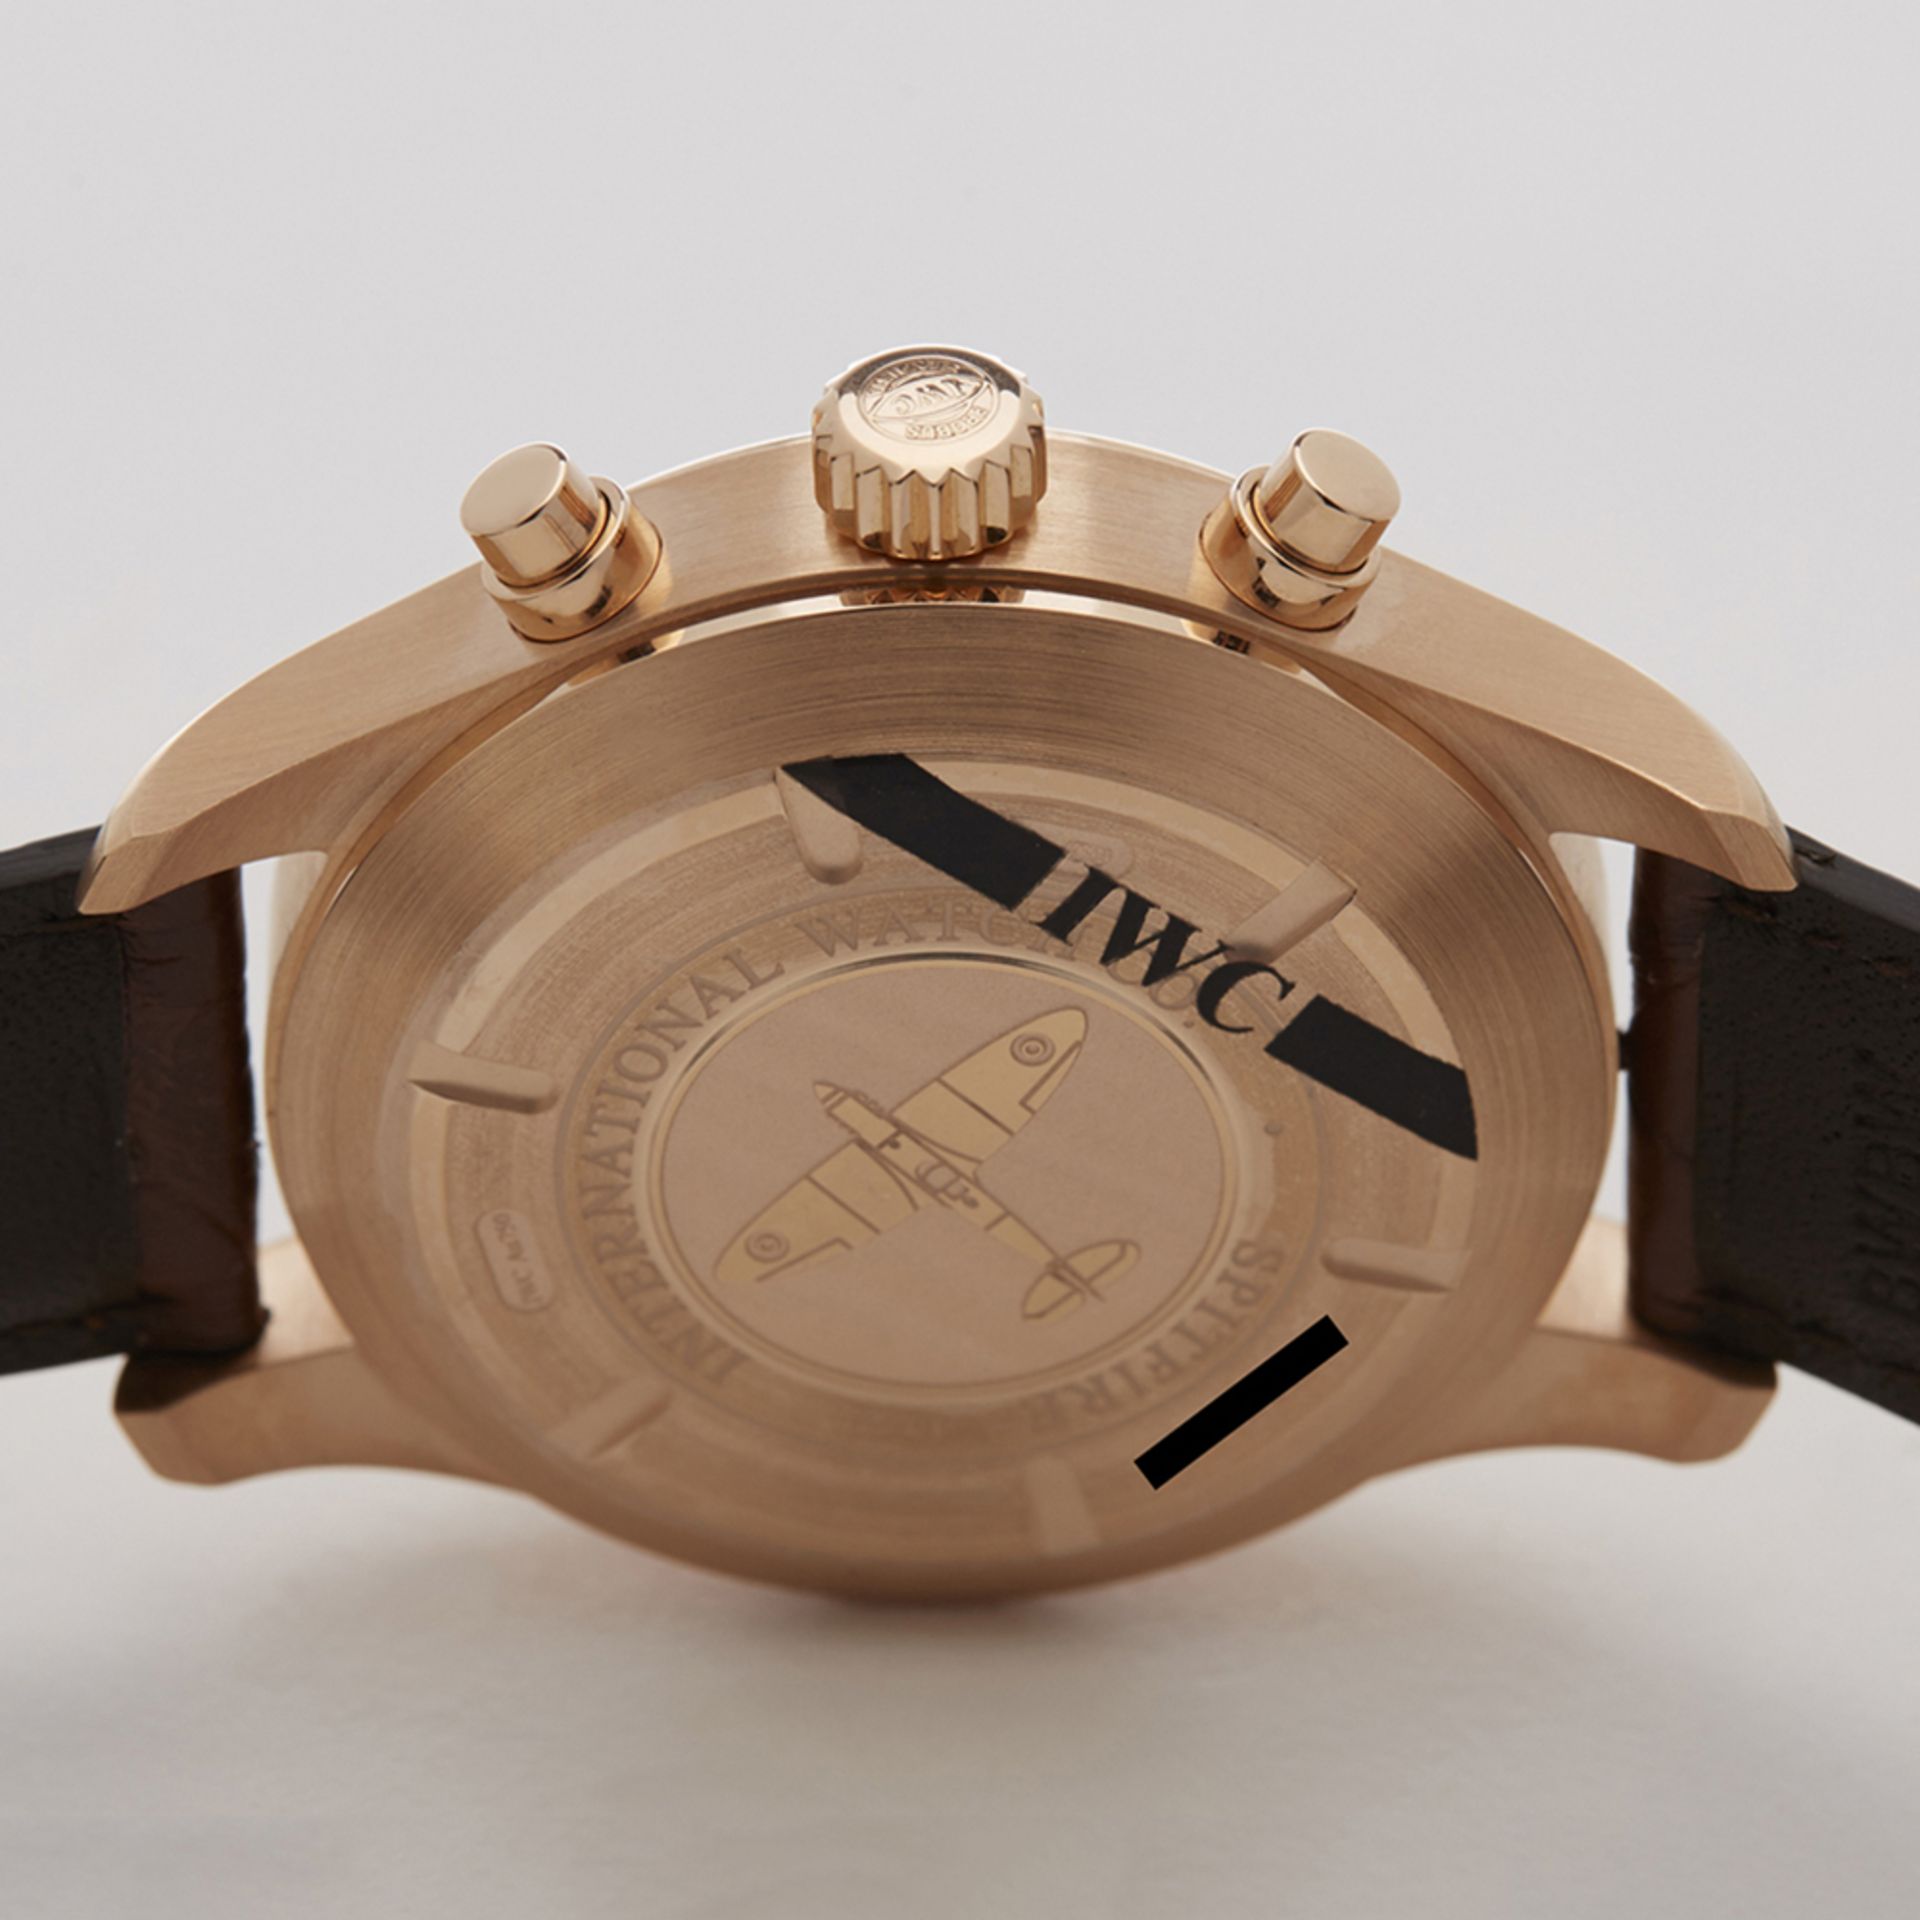 IWC, Pilot's Chronograph Spitfire 43mm 18k Rose Gold IW387803 - Image 8 of 9